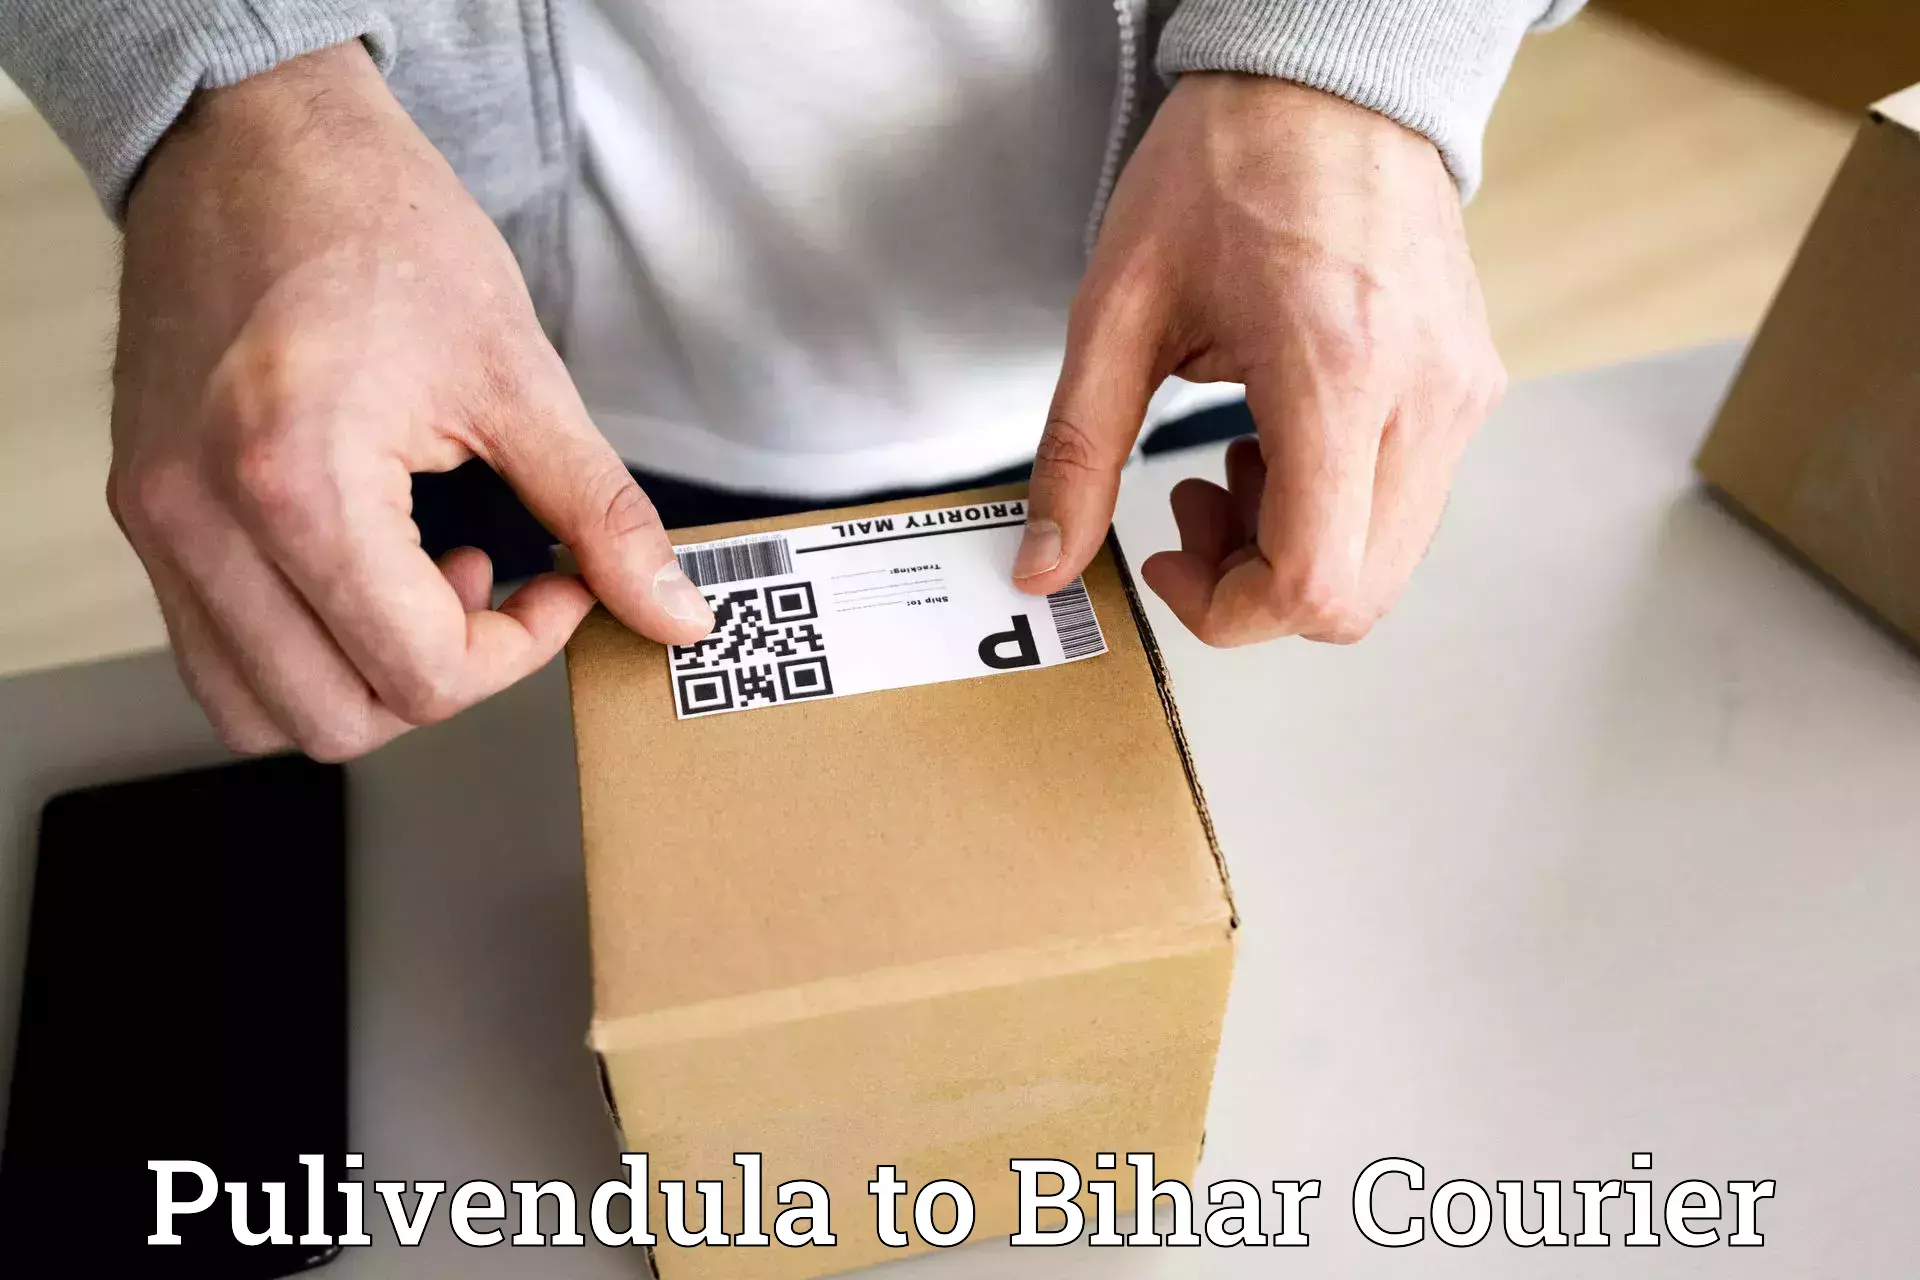 Courier service partnerships Pulivendula to Araria